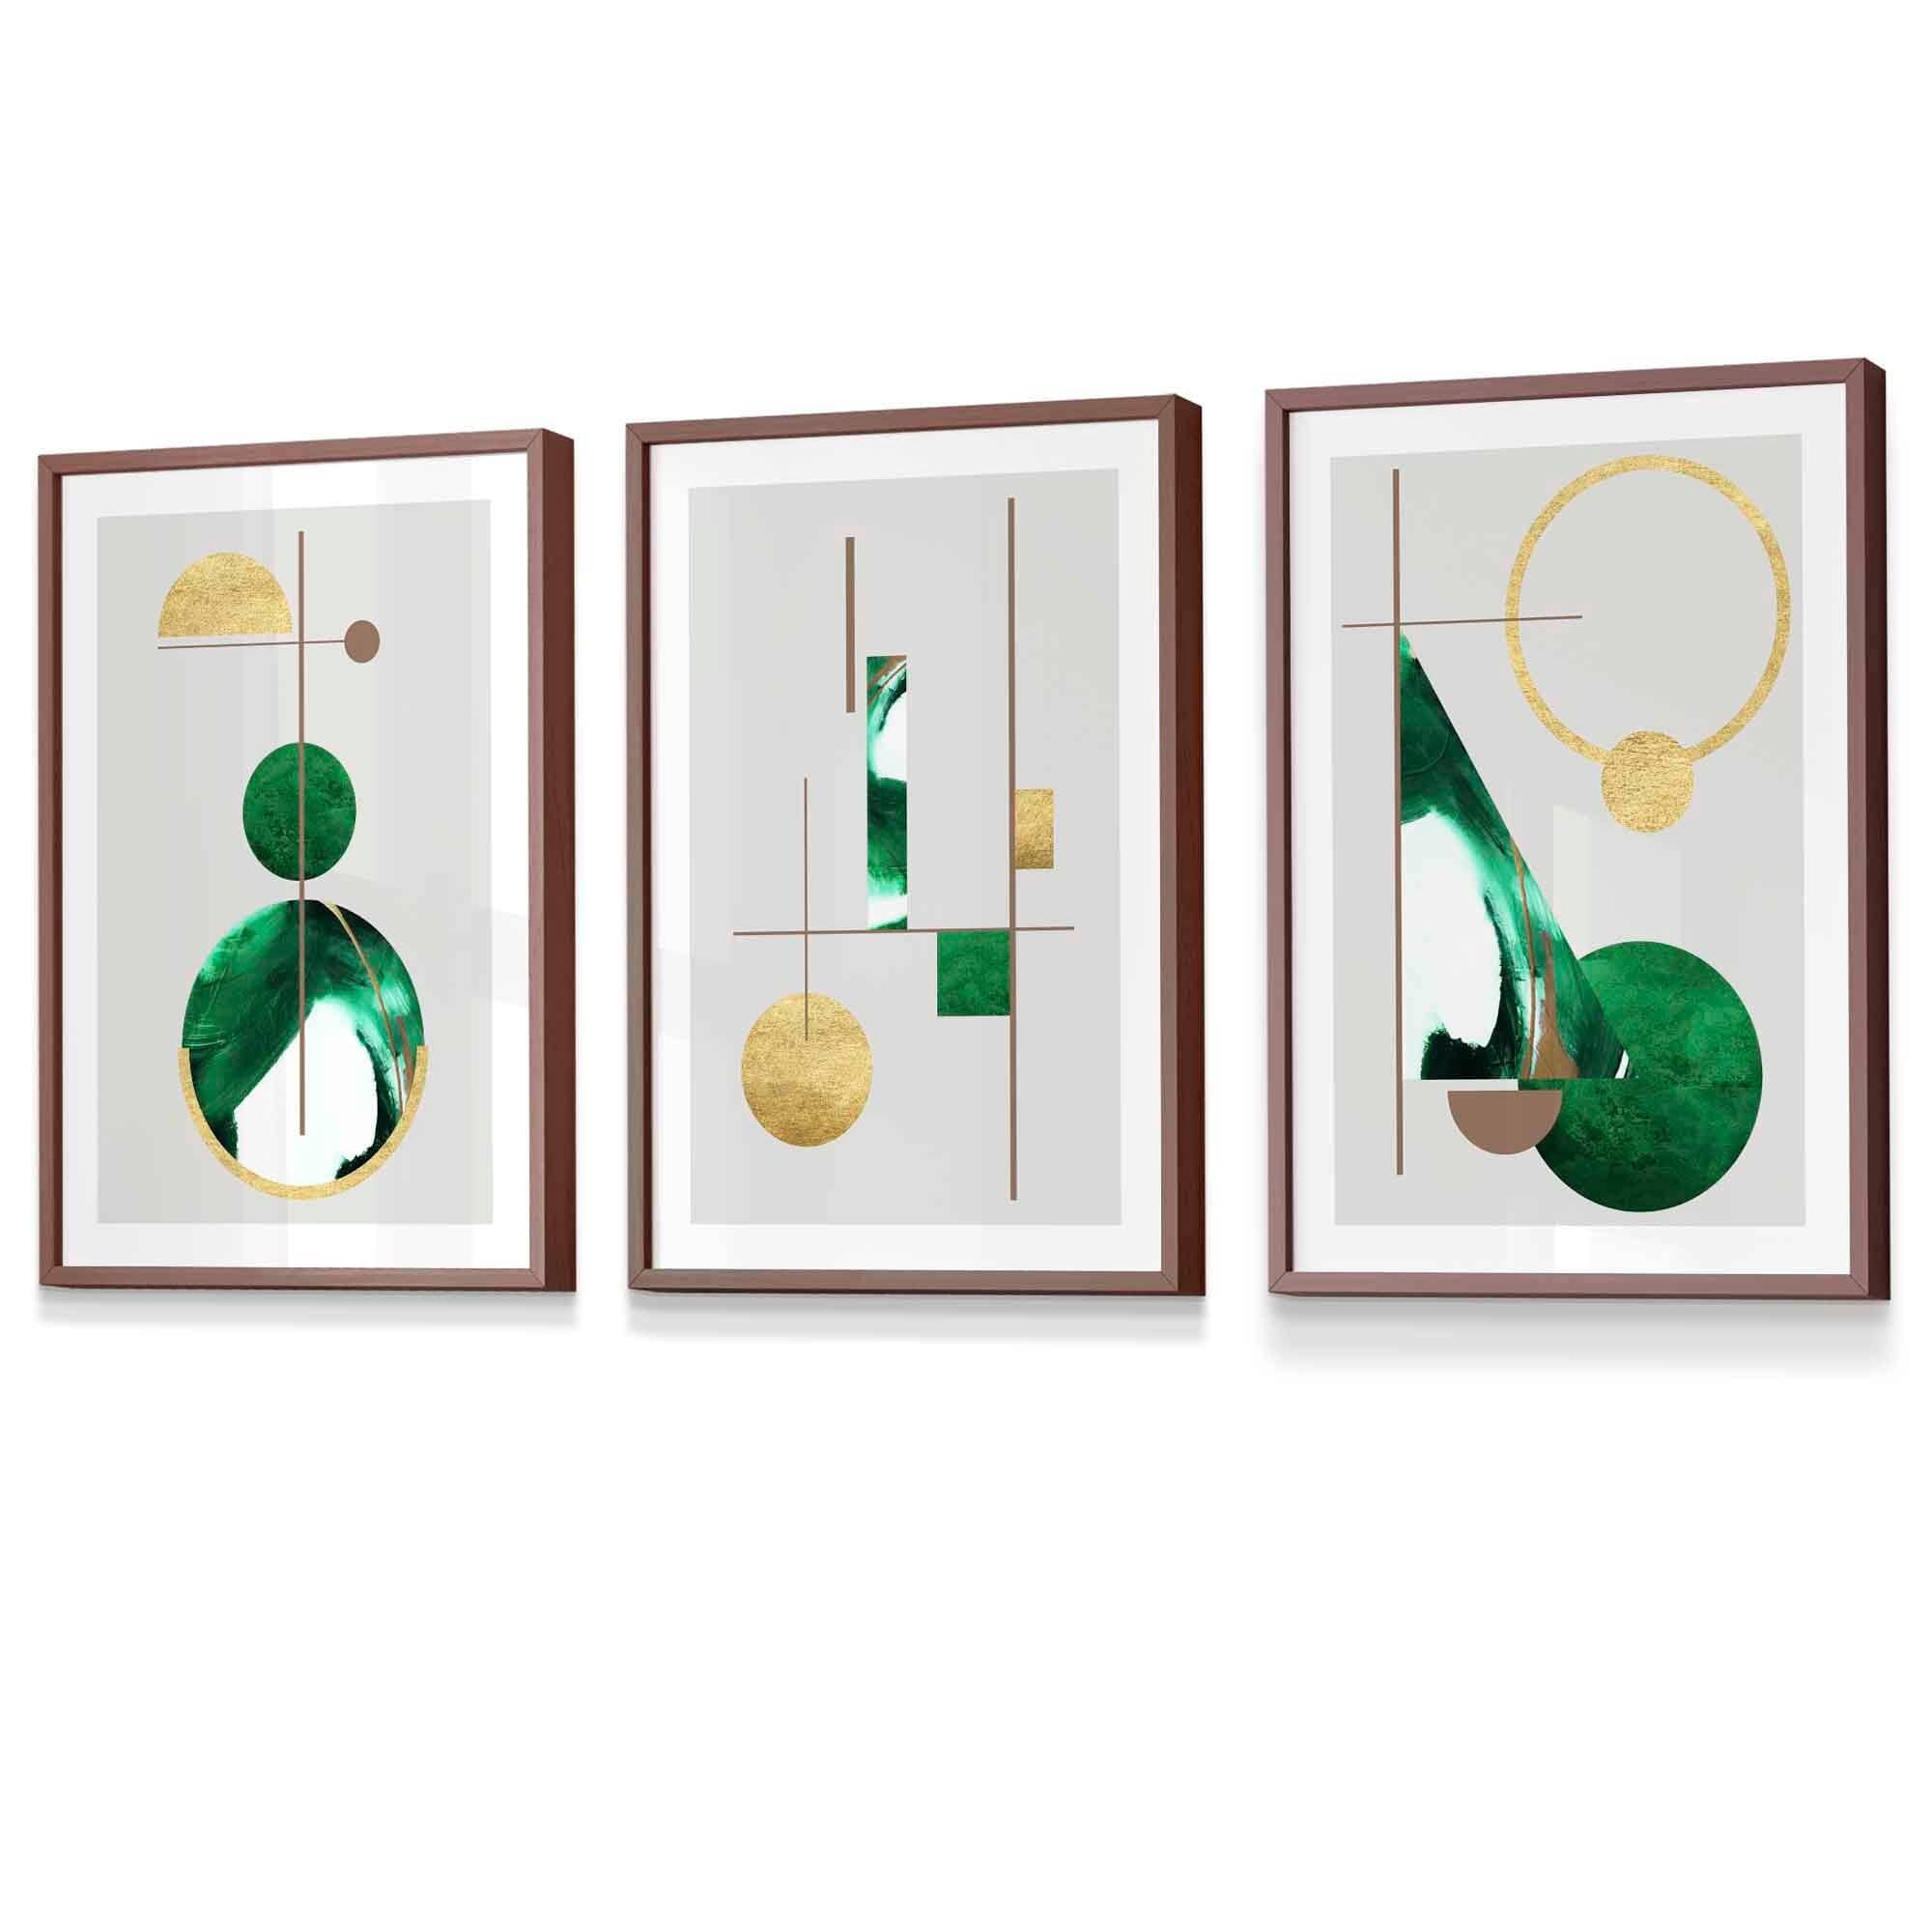 Abstract Textured Geometric Art in Green and Gold Mid Century Modern FRAMED Wall Art Prints / Posters 430